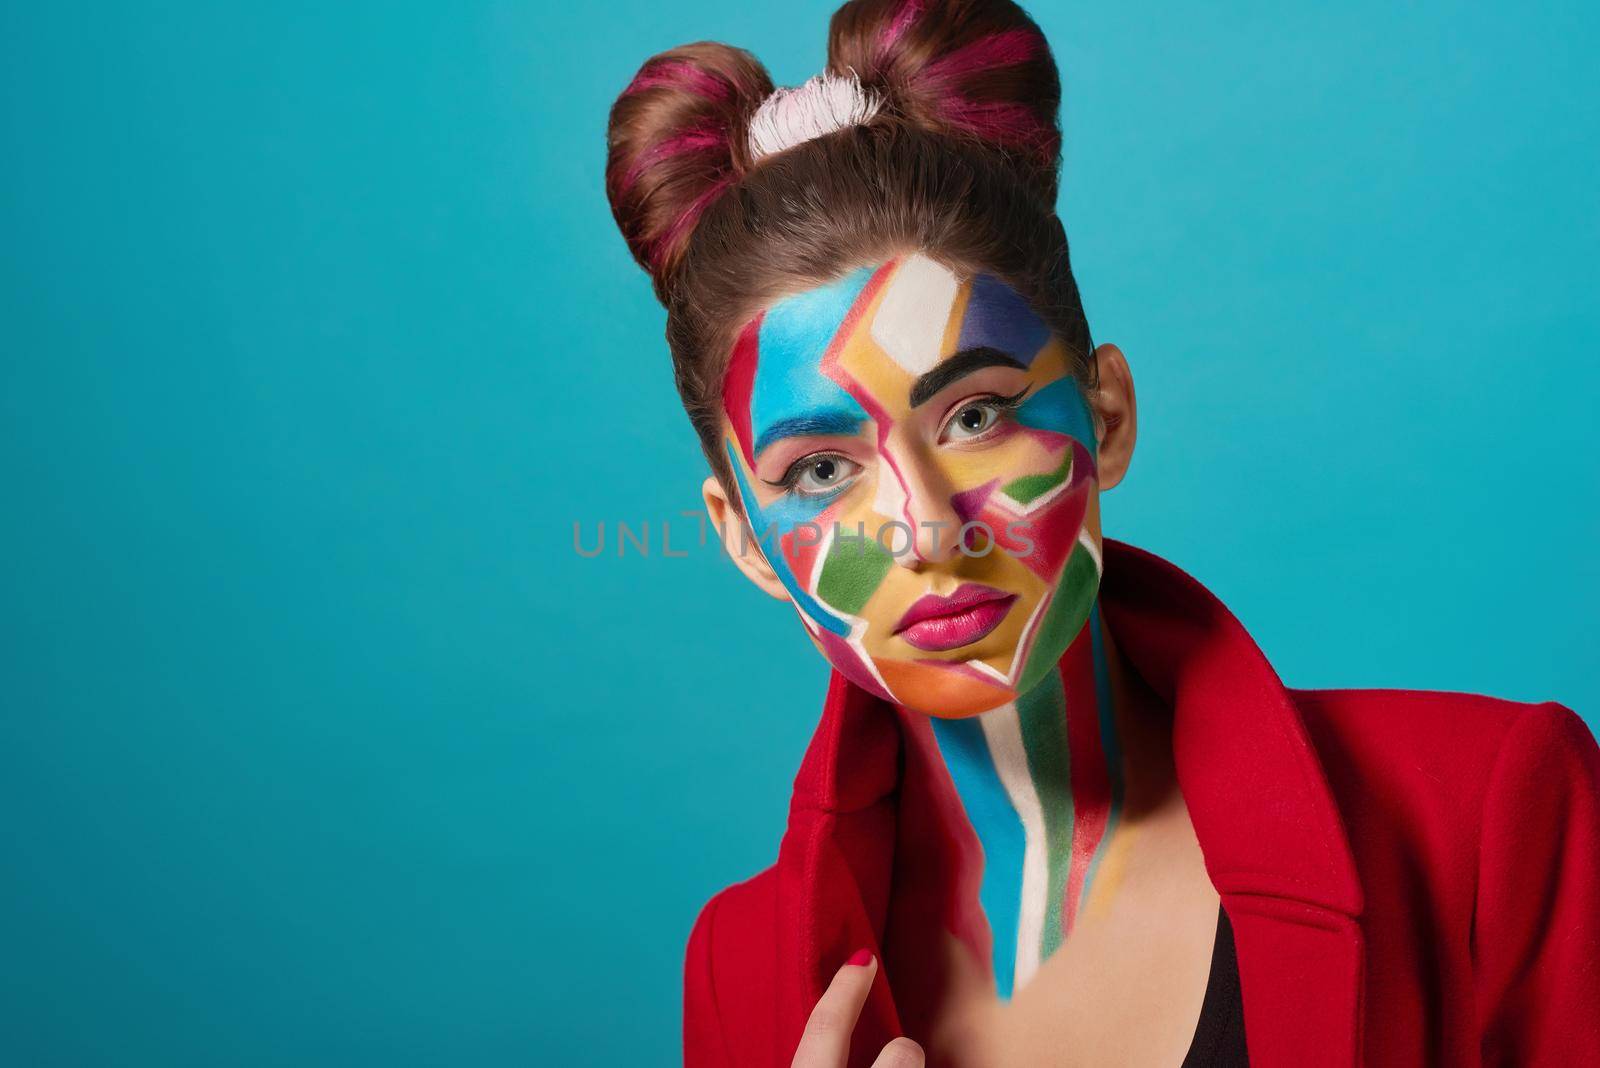 Funky and stylish model wearing in red clothes, has creative, colorful pop art make up. Confident girl has bow hairstyle, looks like comic character. Woman looking at camera.